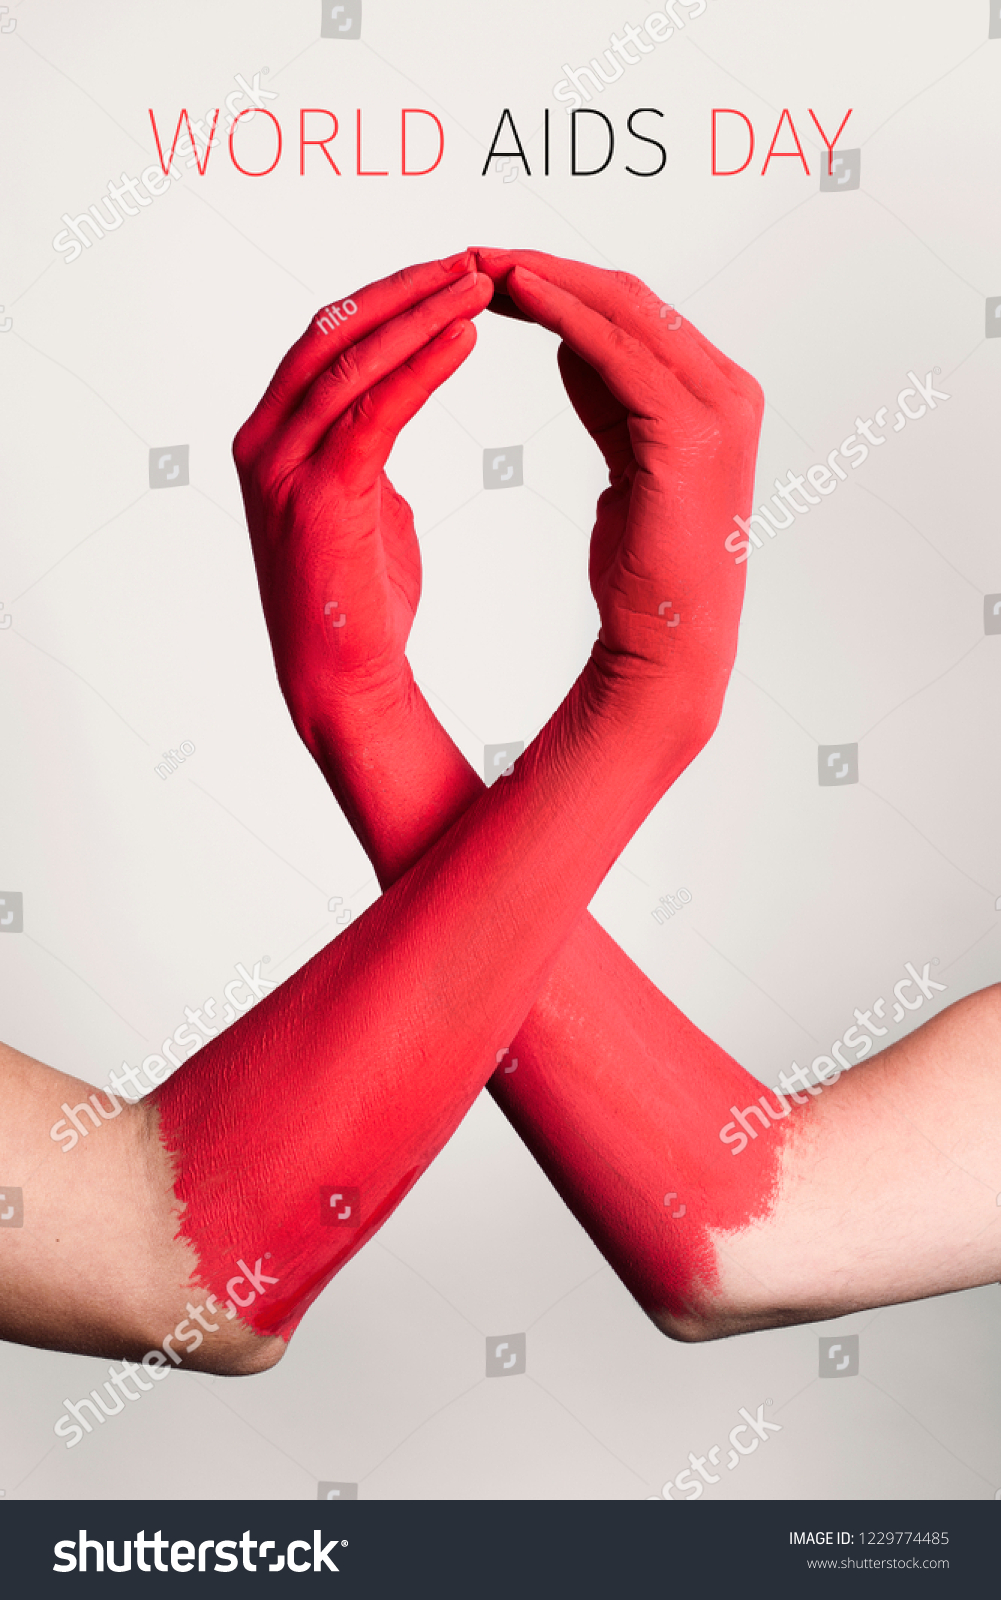 closeup of the arms of two men painted red forming a red awareness ribbon and the text world aids day against an off-white background #1229774485